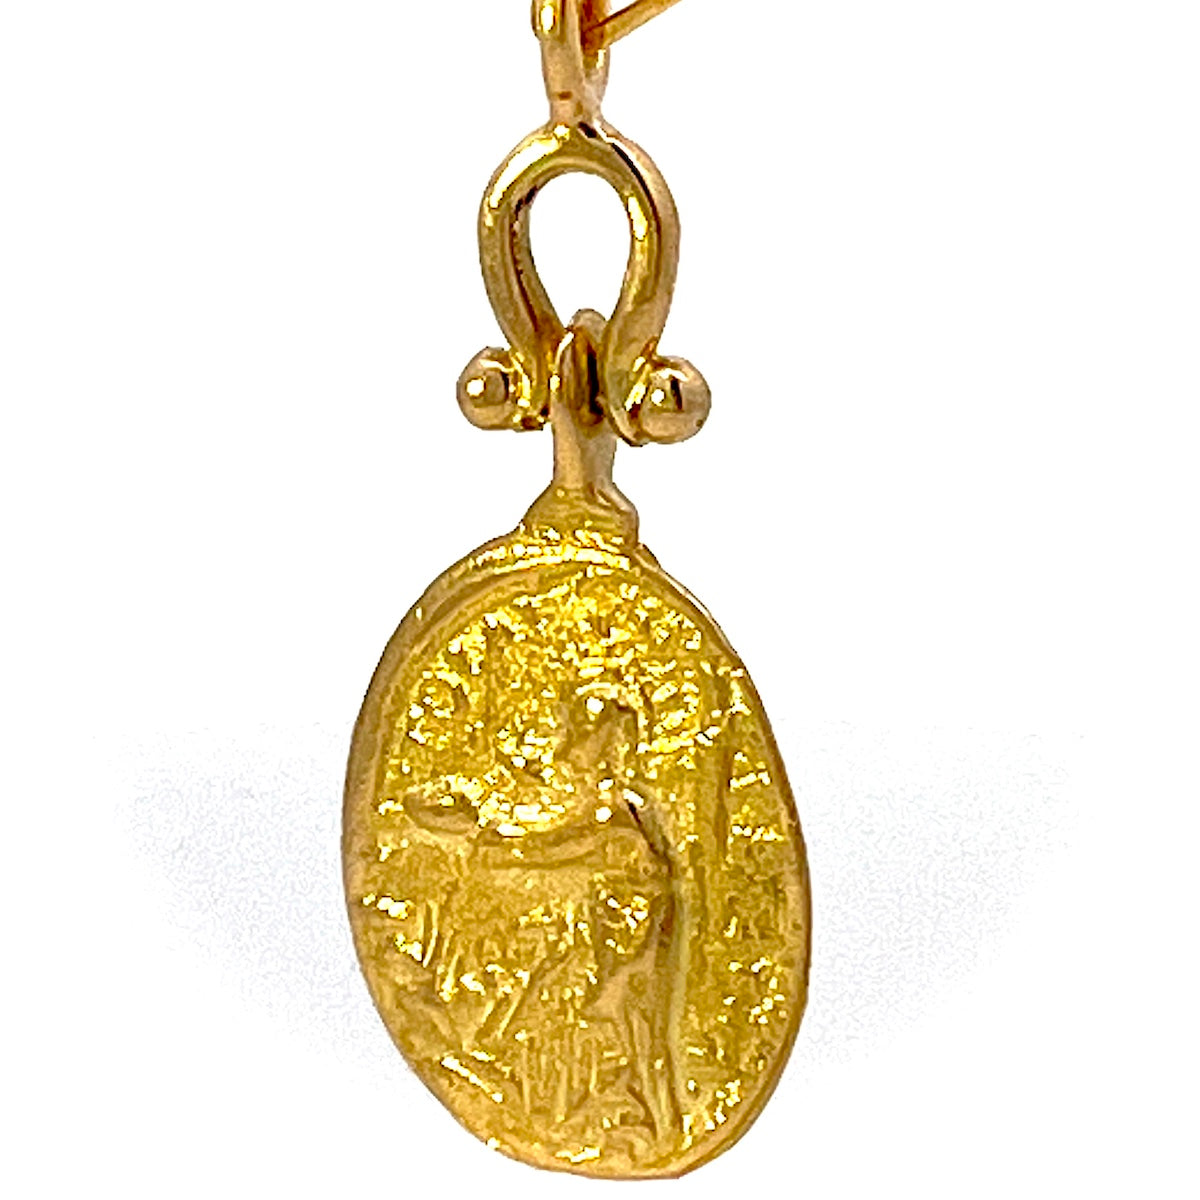 saint_francis_of_assisi_gold_medallion_pendant_trewarne_jewellers_melbourne_18ct_yellow_gold_religious_spiritual_necklace_mens_jewelry